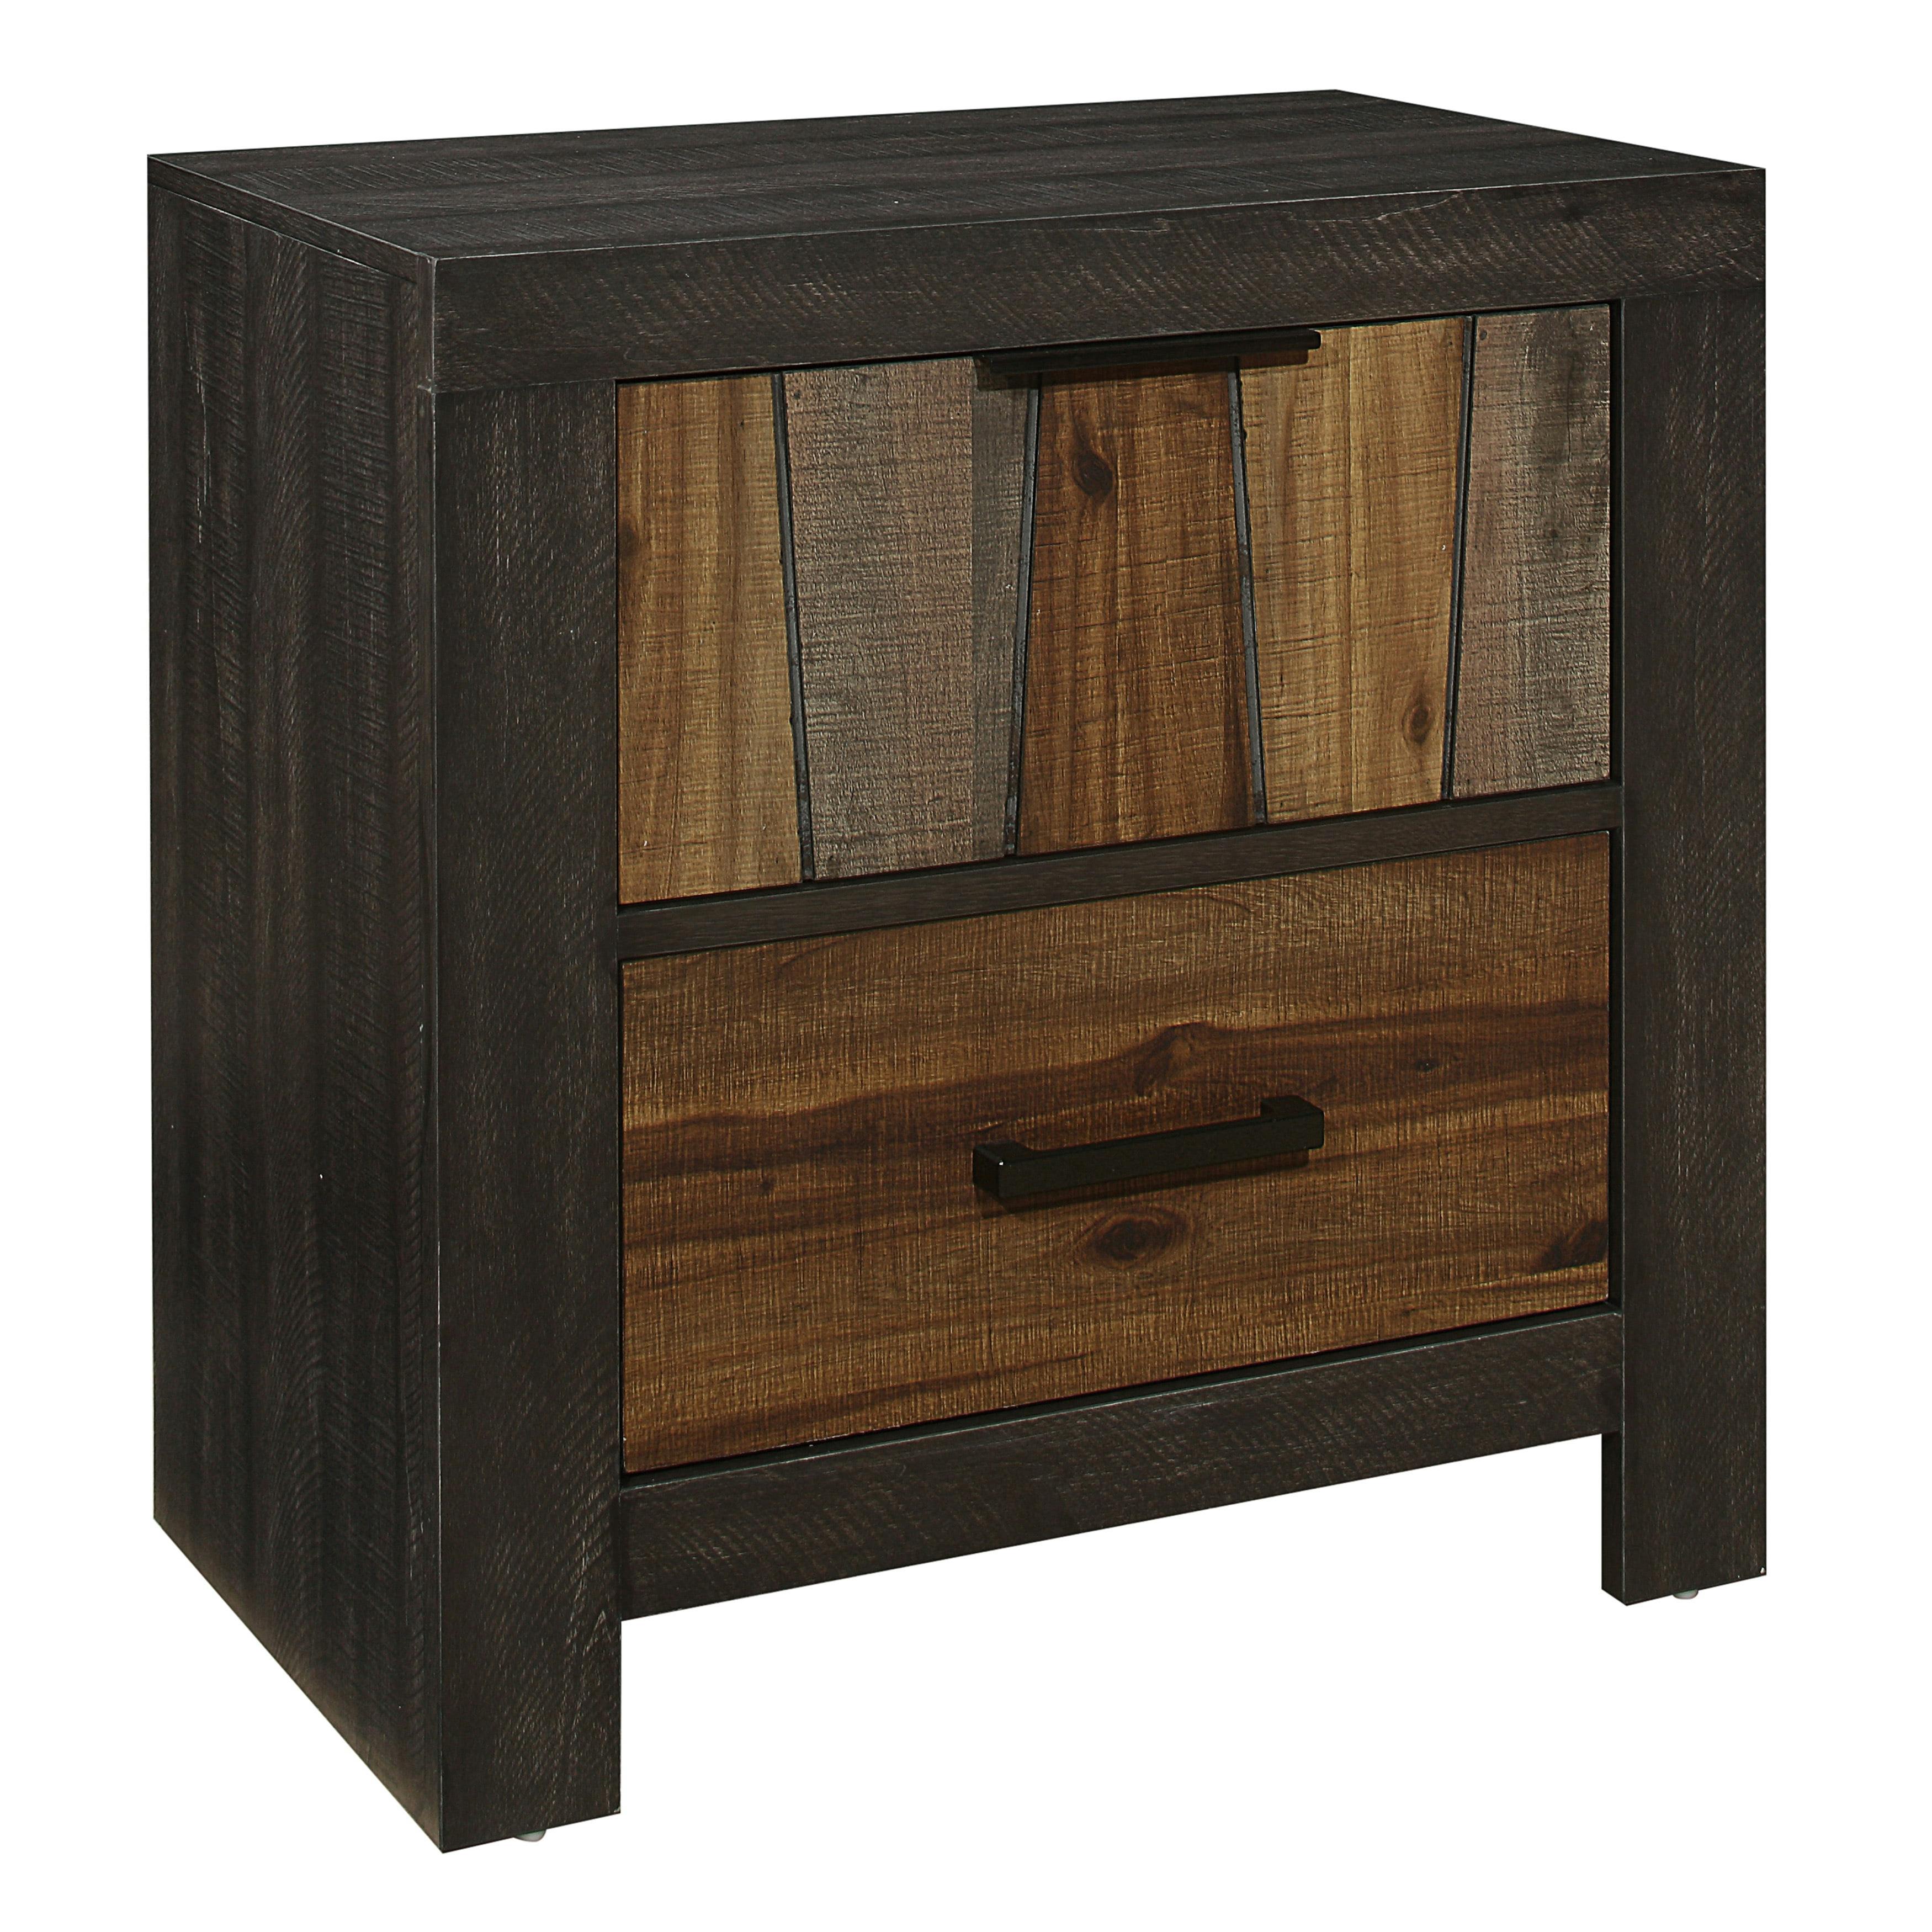 Transitional Multi-Tone 2-Drawer Nightstand with Metal Glides